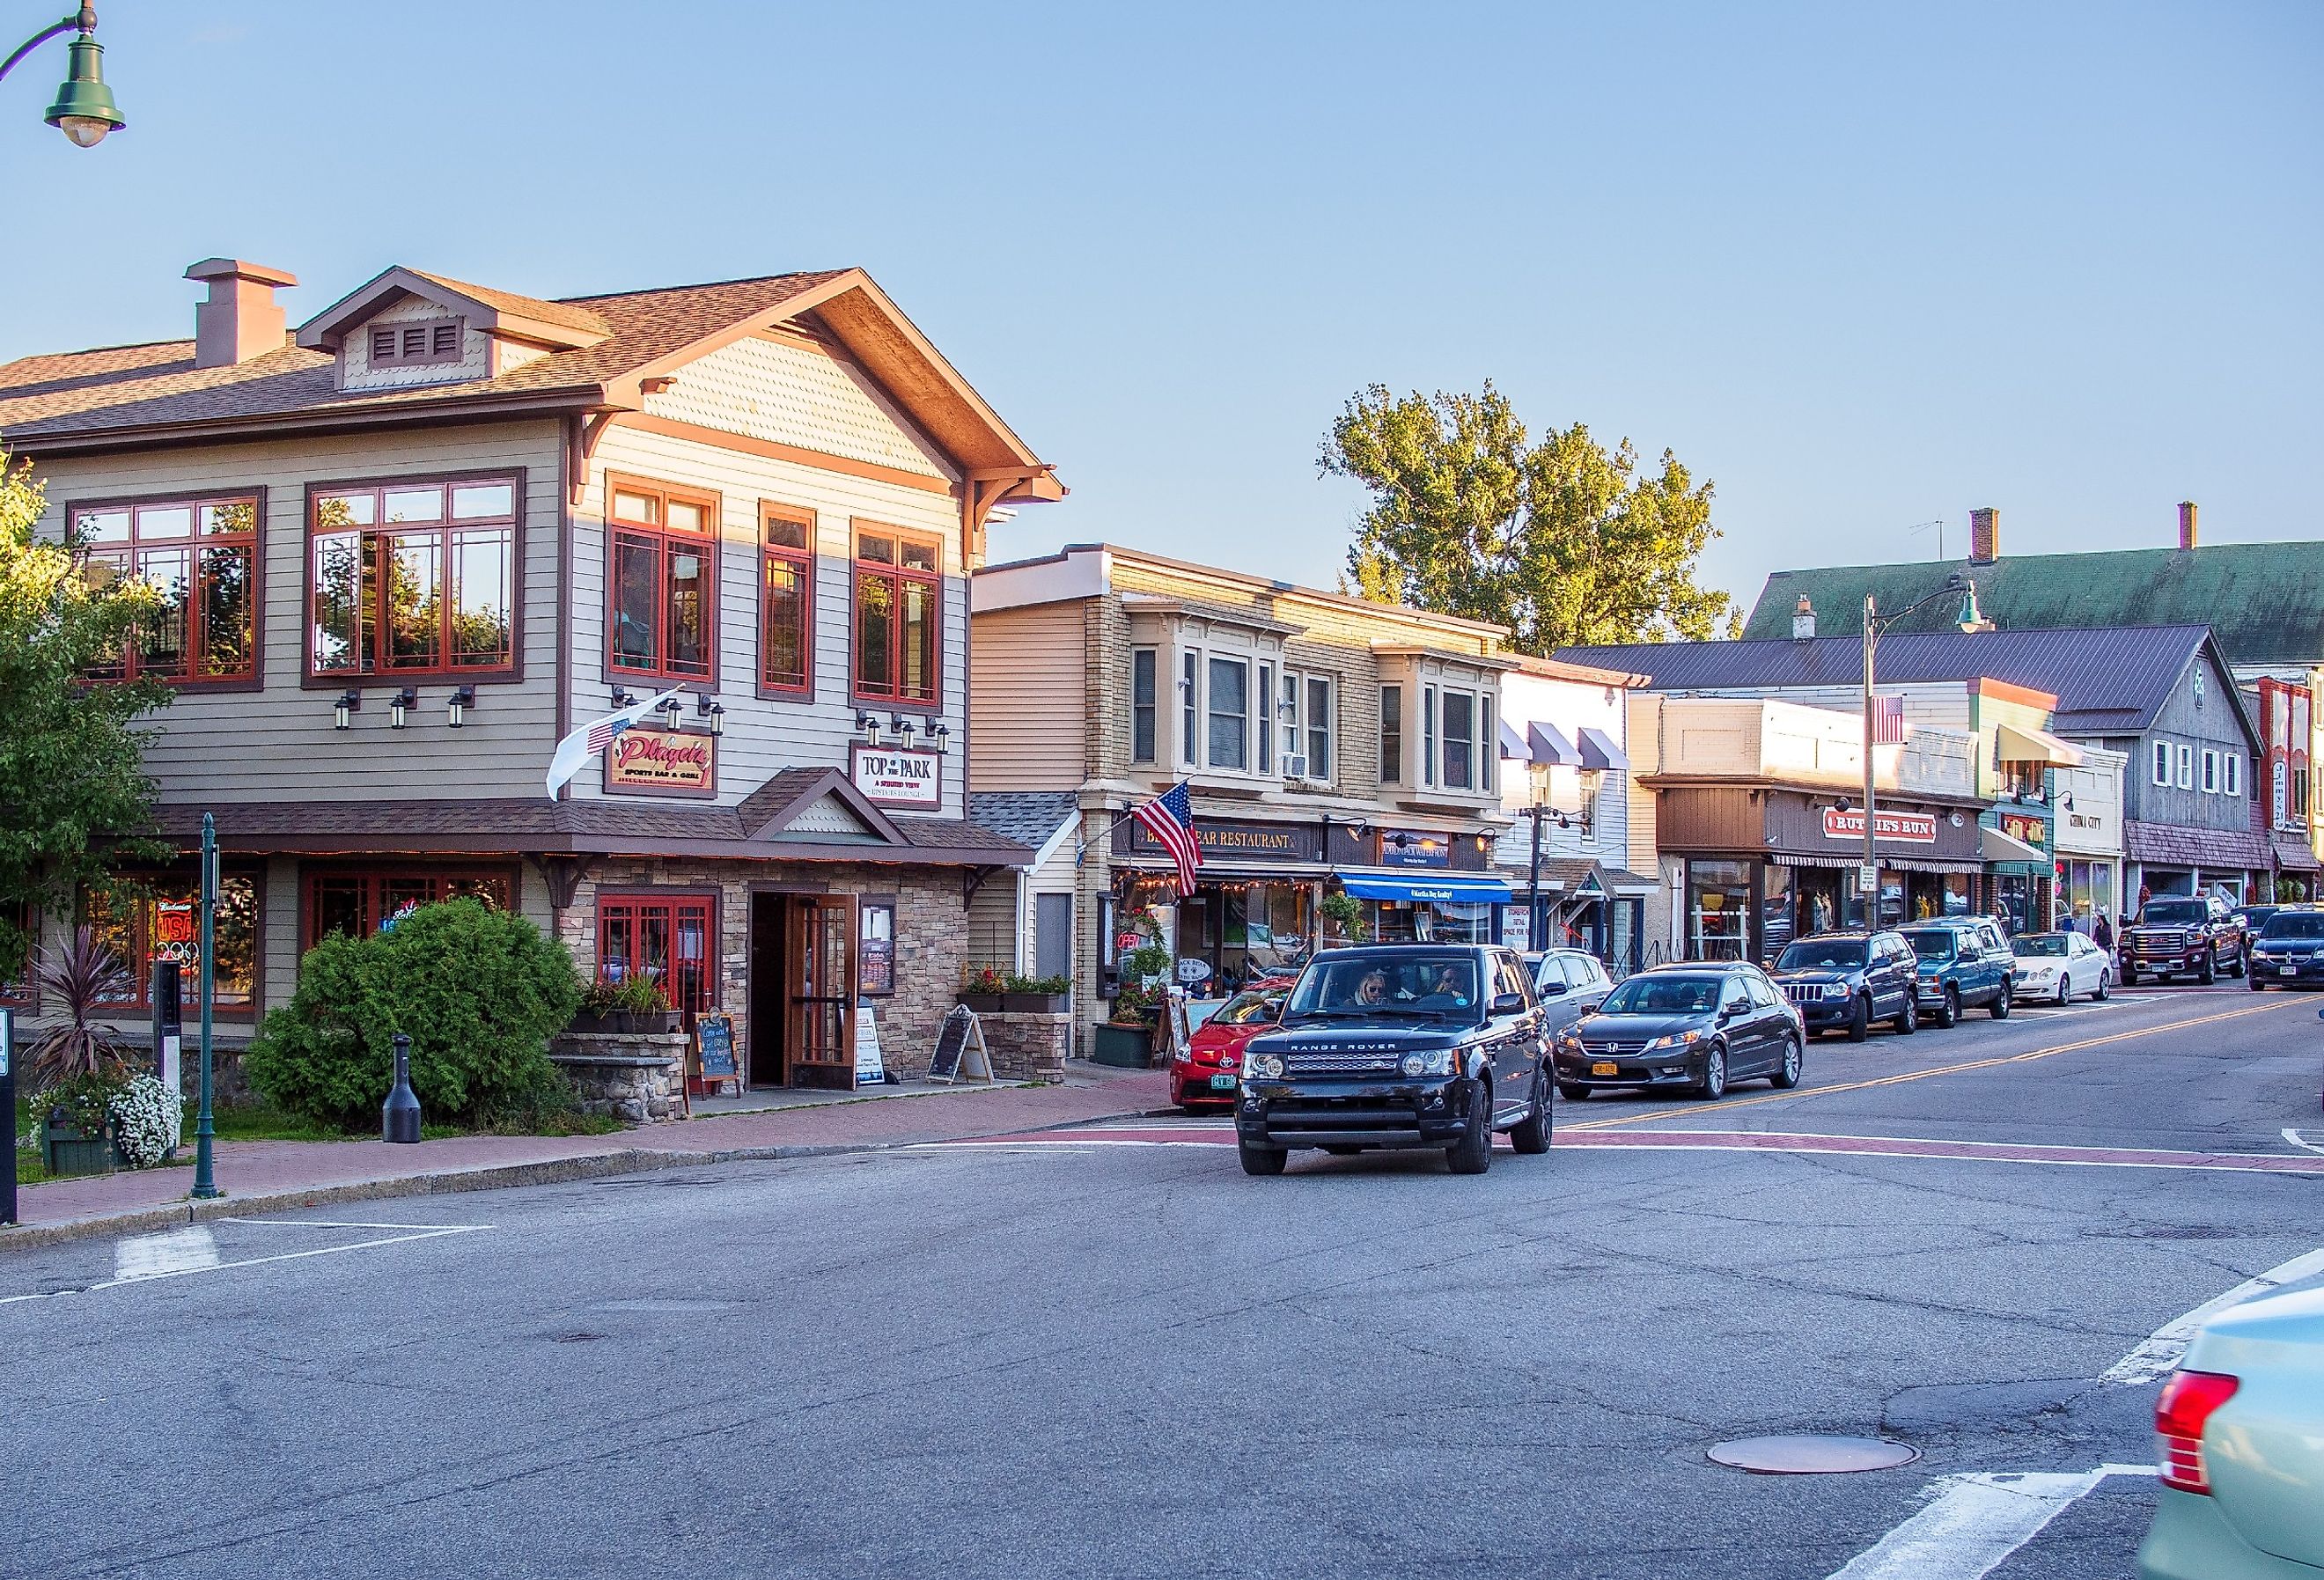 Main Street, located in Lake Placid in Upstate New York state. Image credit Karlsson Photo via Shutterstock